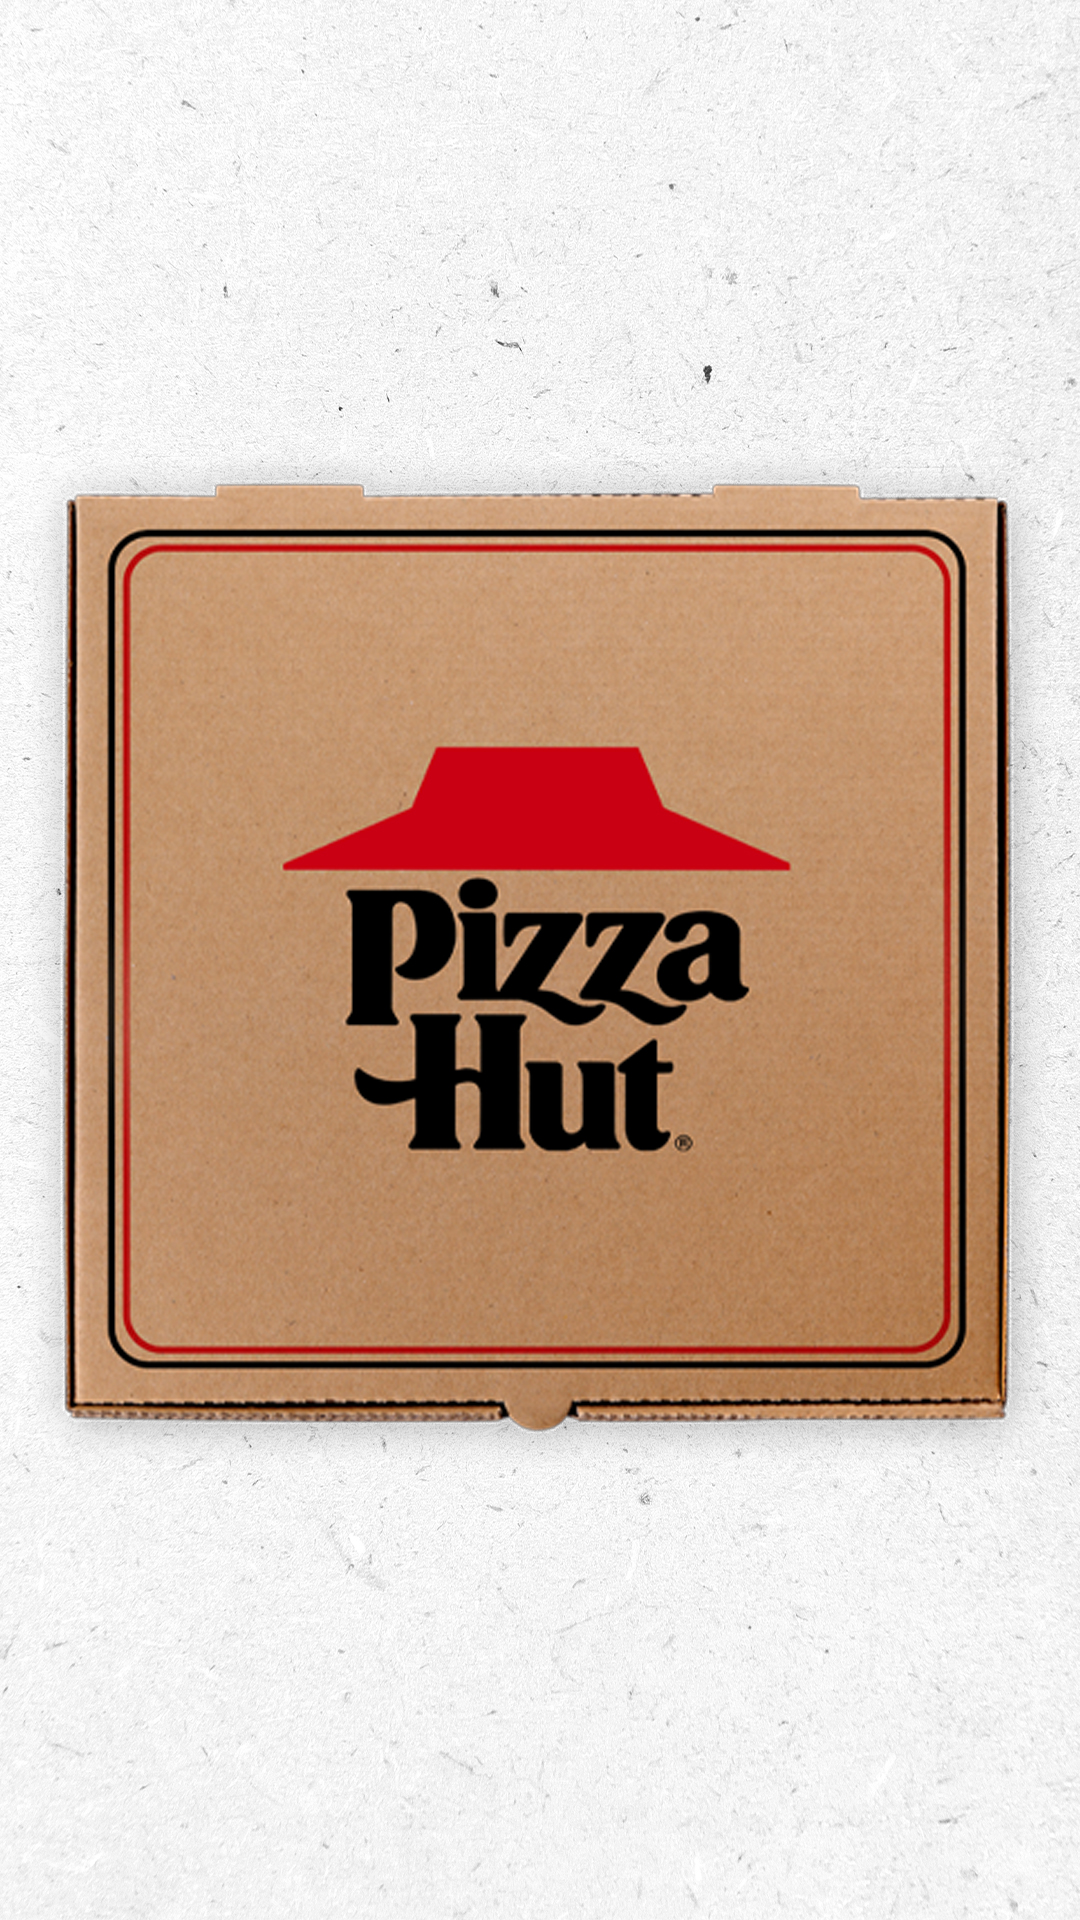 pizza hut boxes for garlic knotes